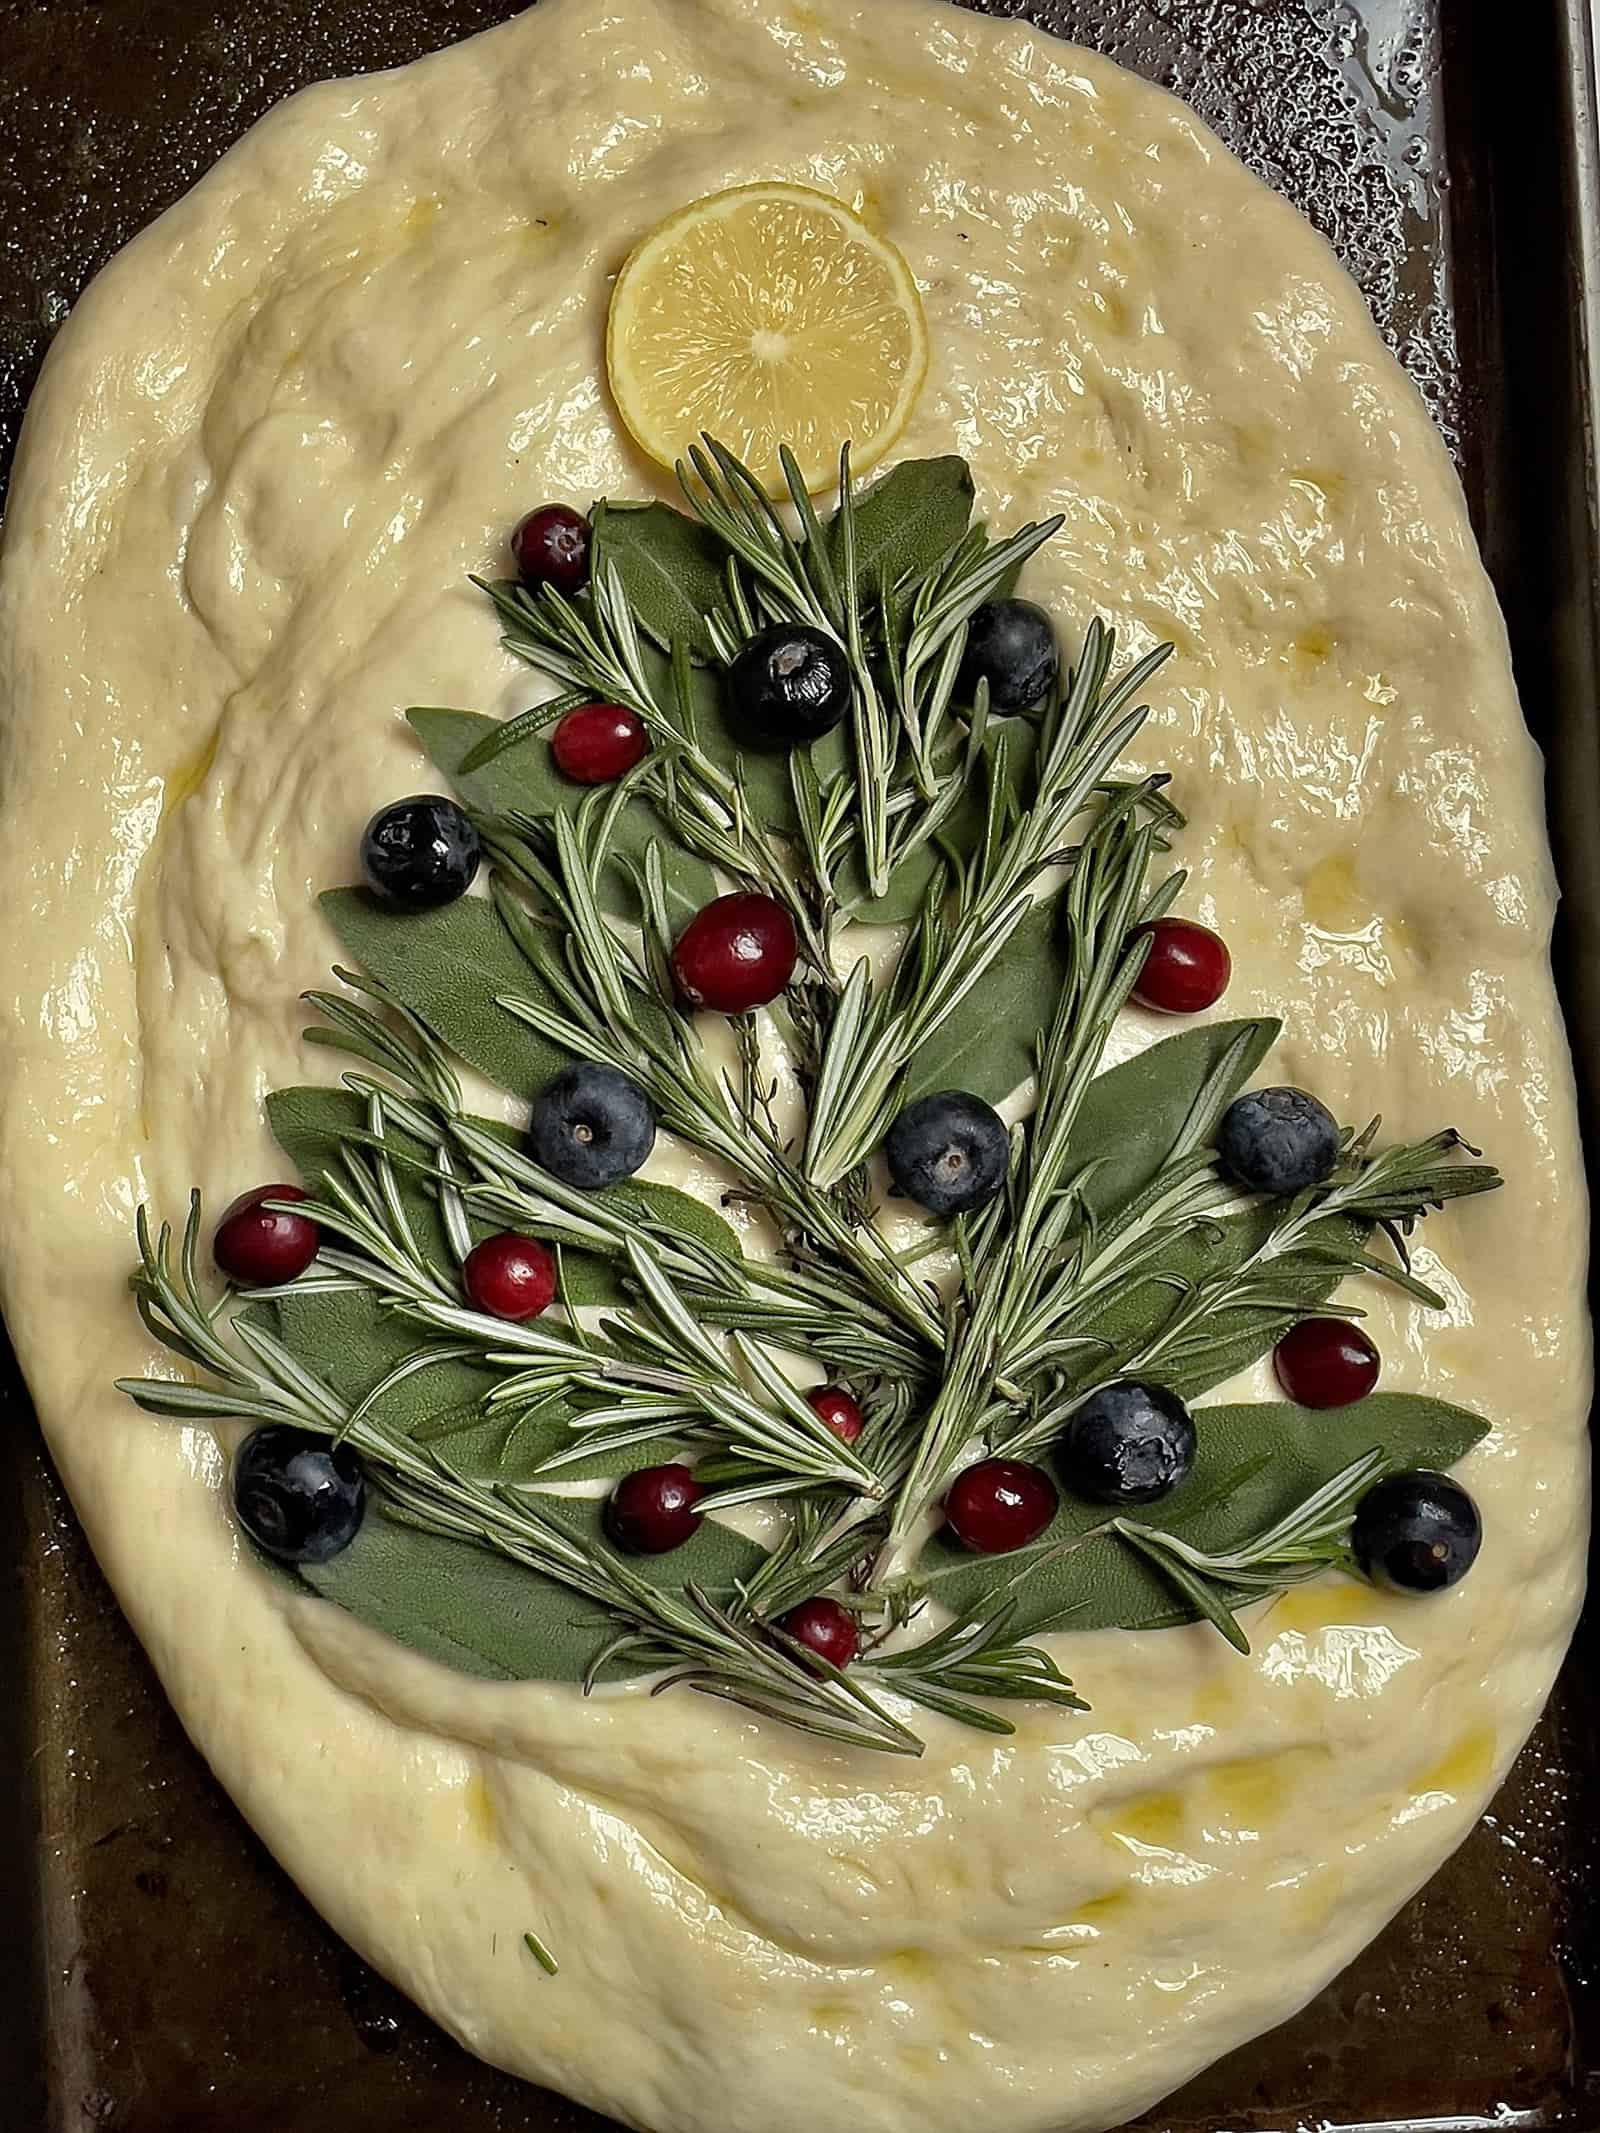 Christmas tree design on focaccia dough, with cranberry and blueberry as ornaments